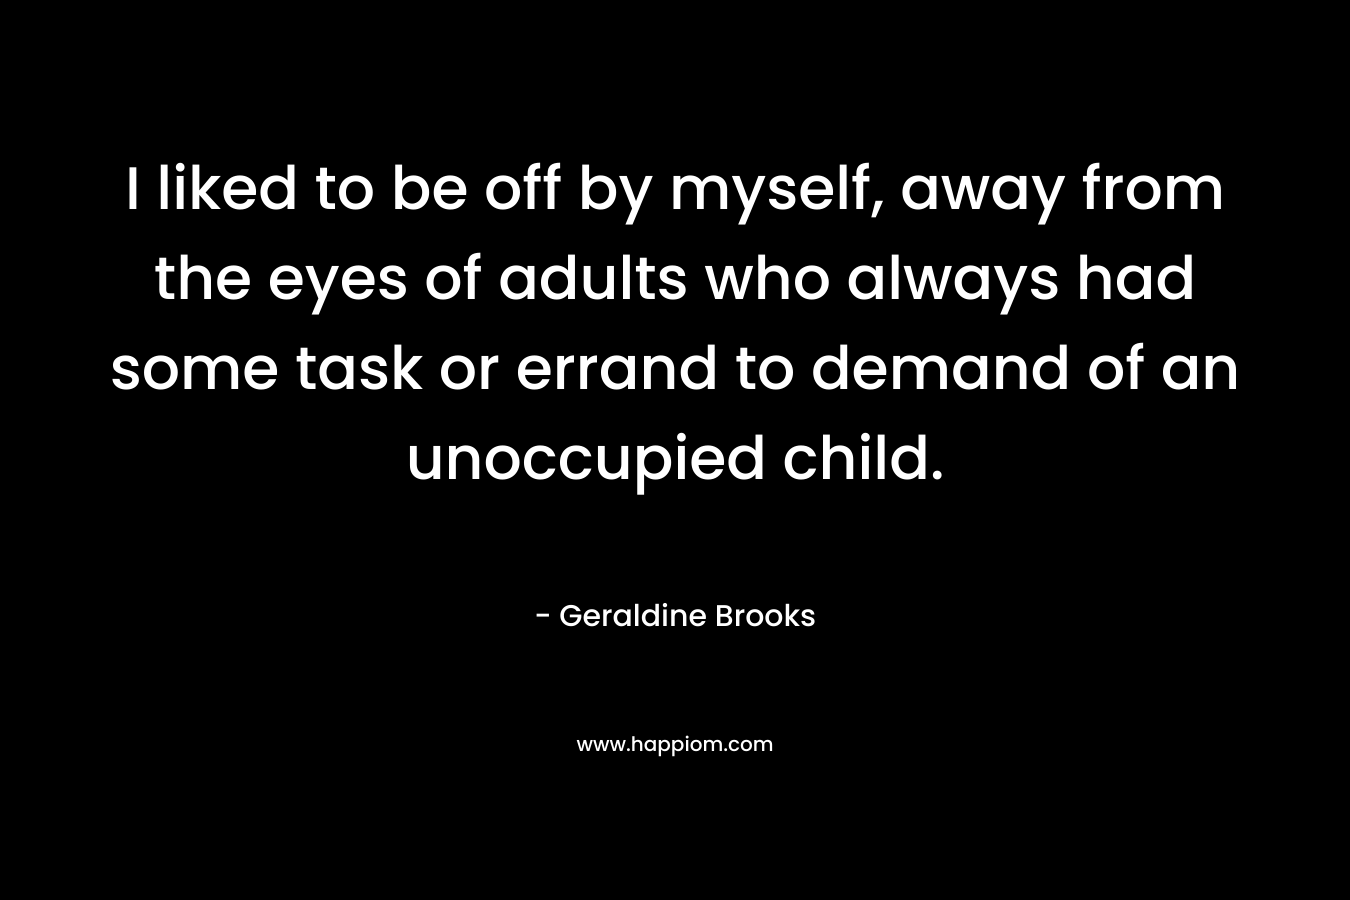 I liked to be off by myself, away from the eyes of adults who always had some task or errand to demand of an unoccupied child. – Geraldine Brooks